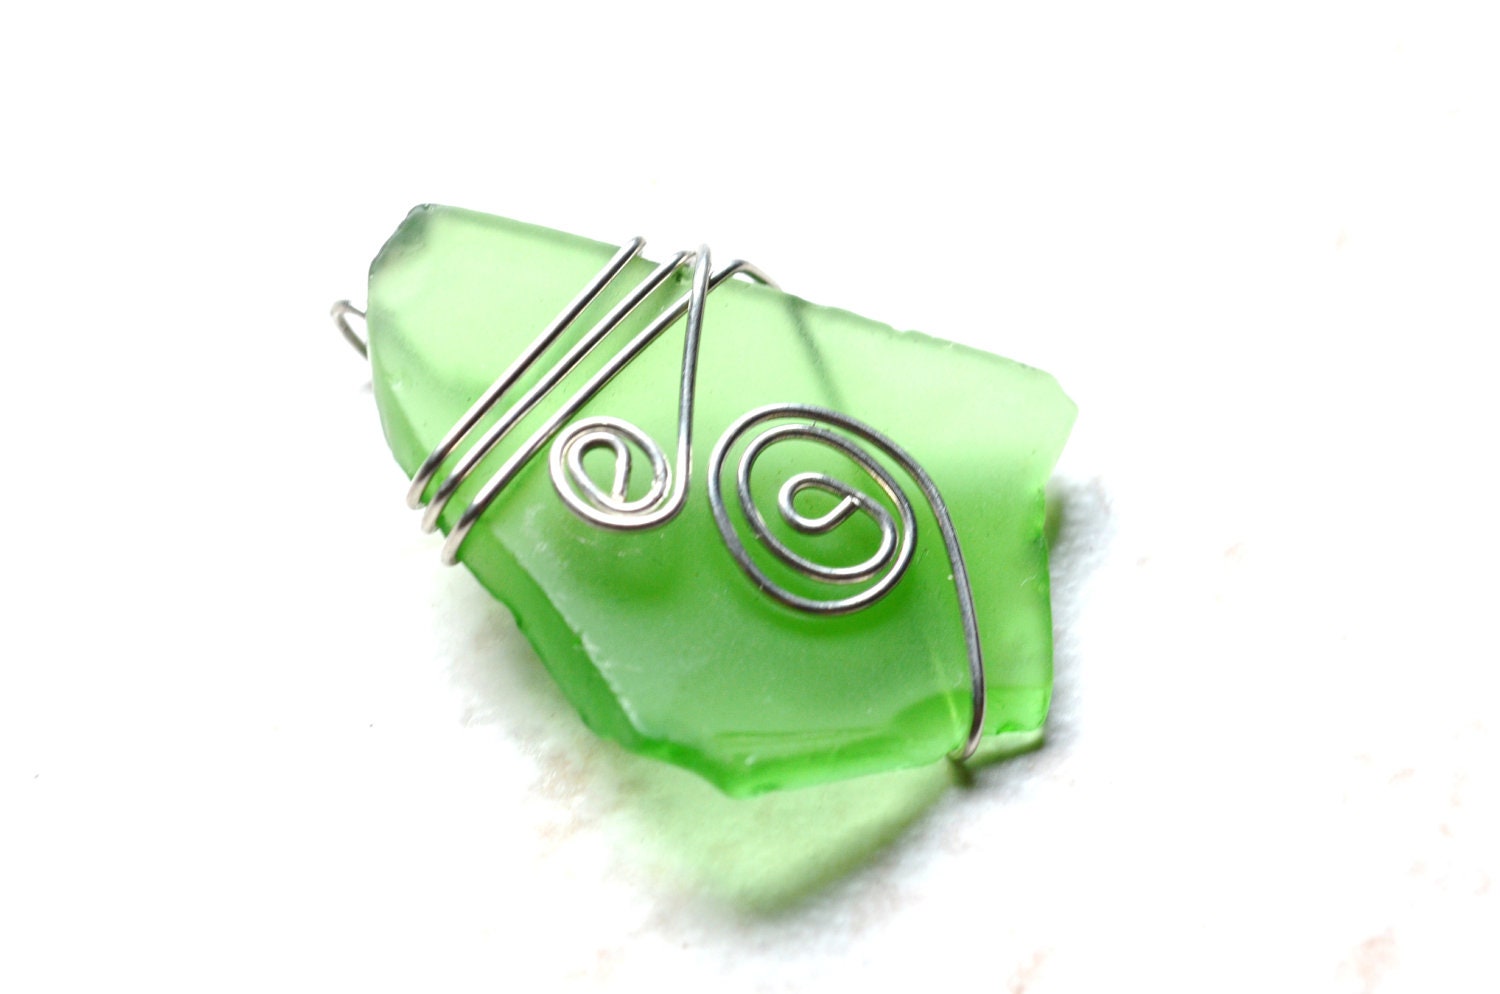 Wire Wrapped Pendant-green-Tumbled Glass-Christmas jewelry-Fall Fashion-Beach wear-inexpensive gift - Designami